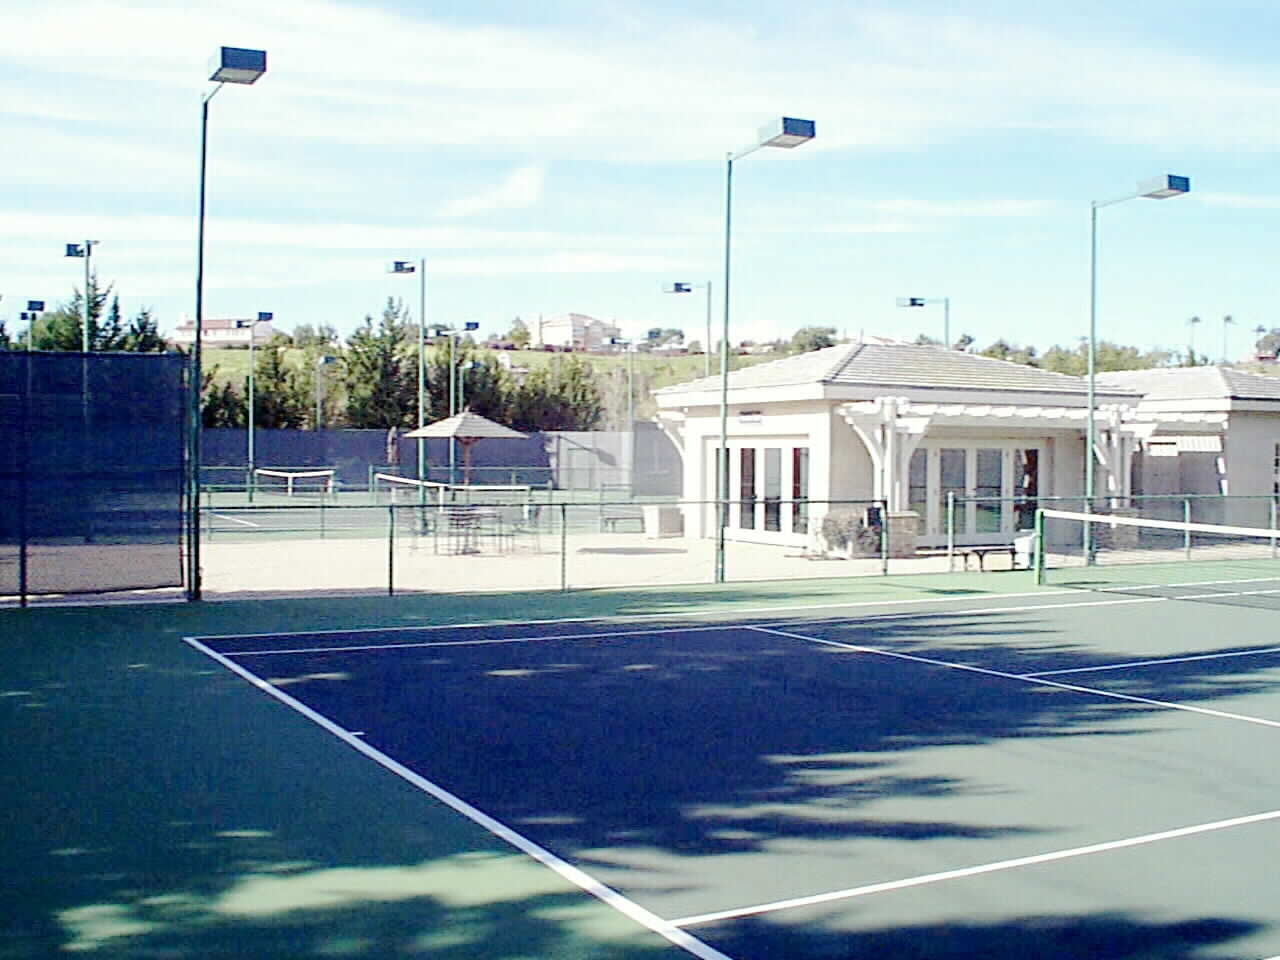 No Waiting Here!  Four Regulation Courts... and Lighted for Night Play.